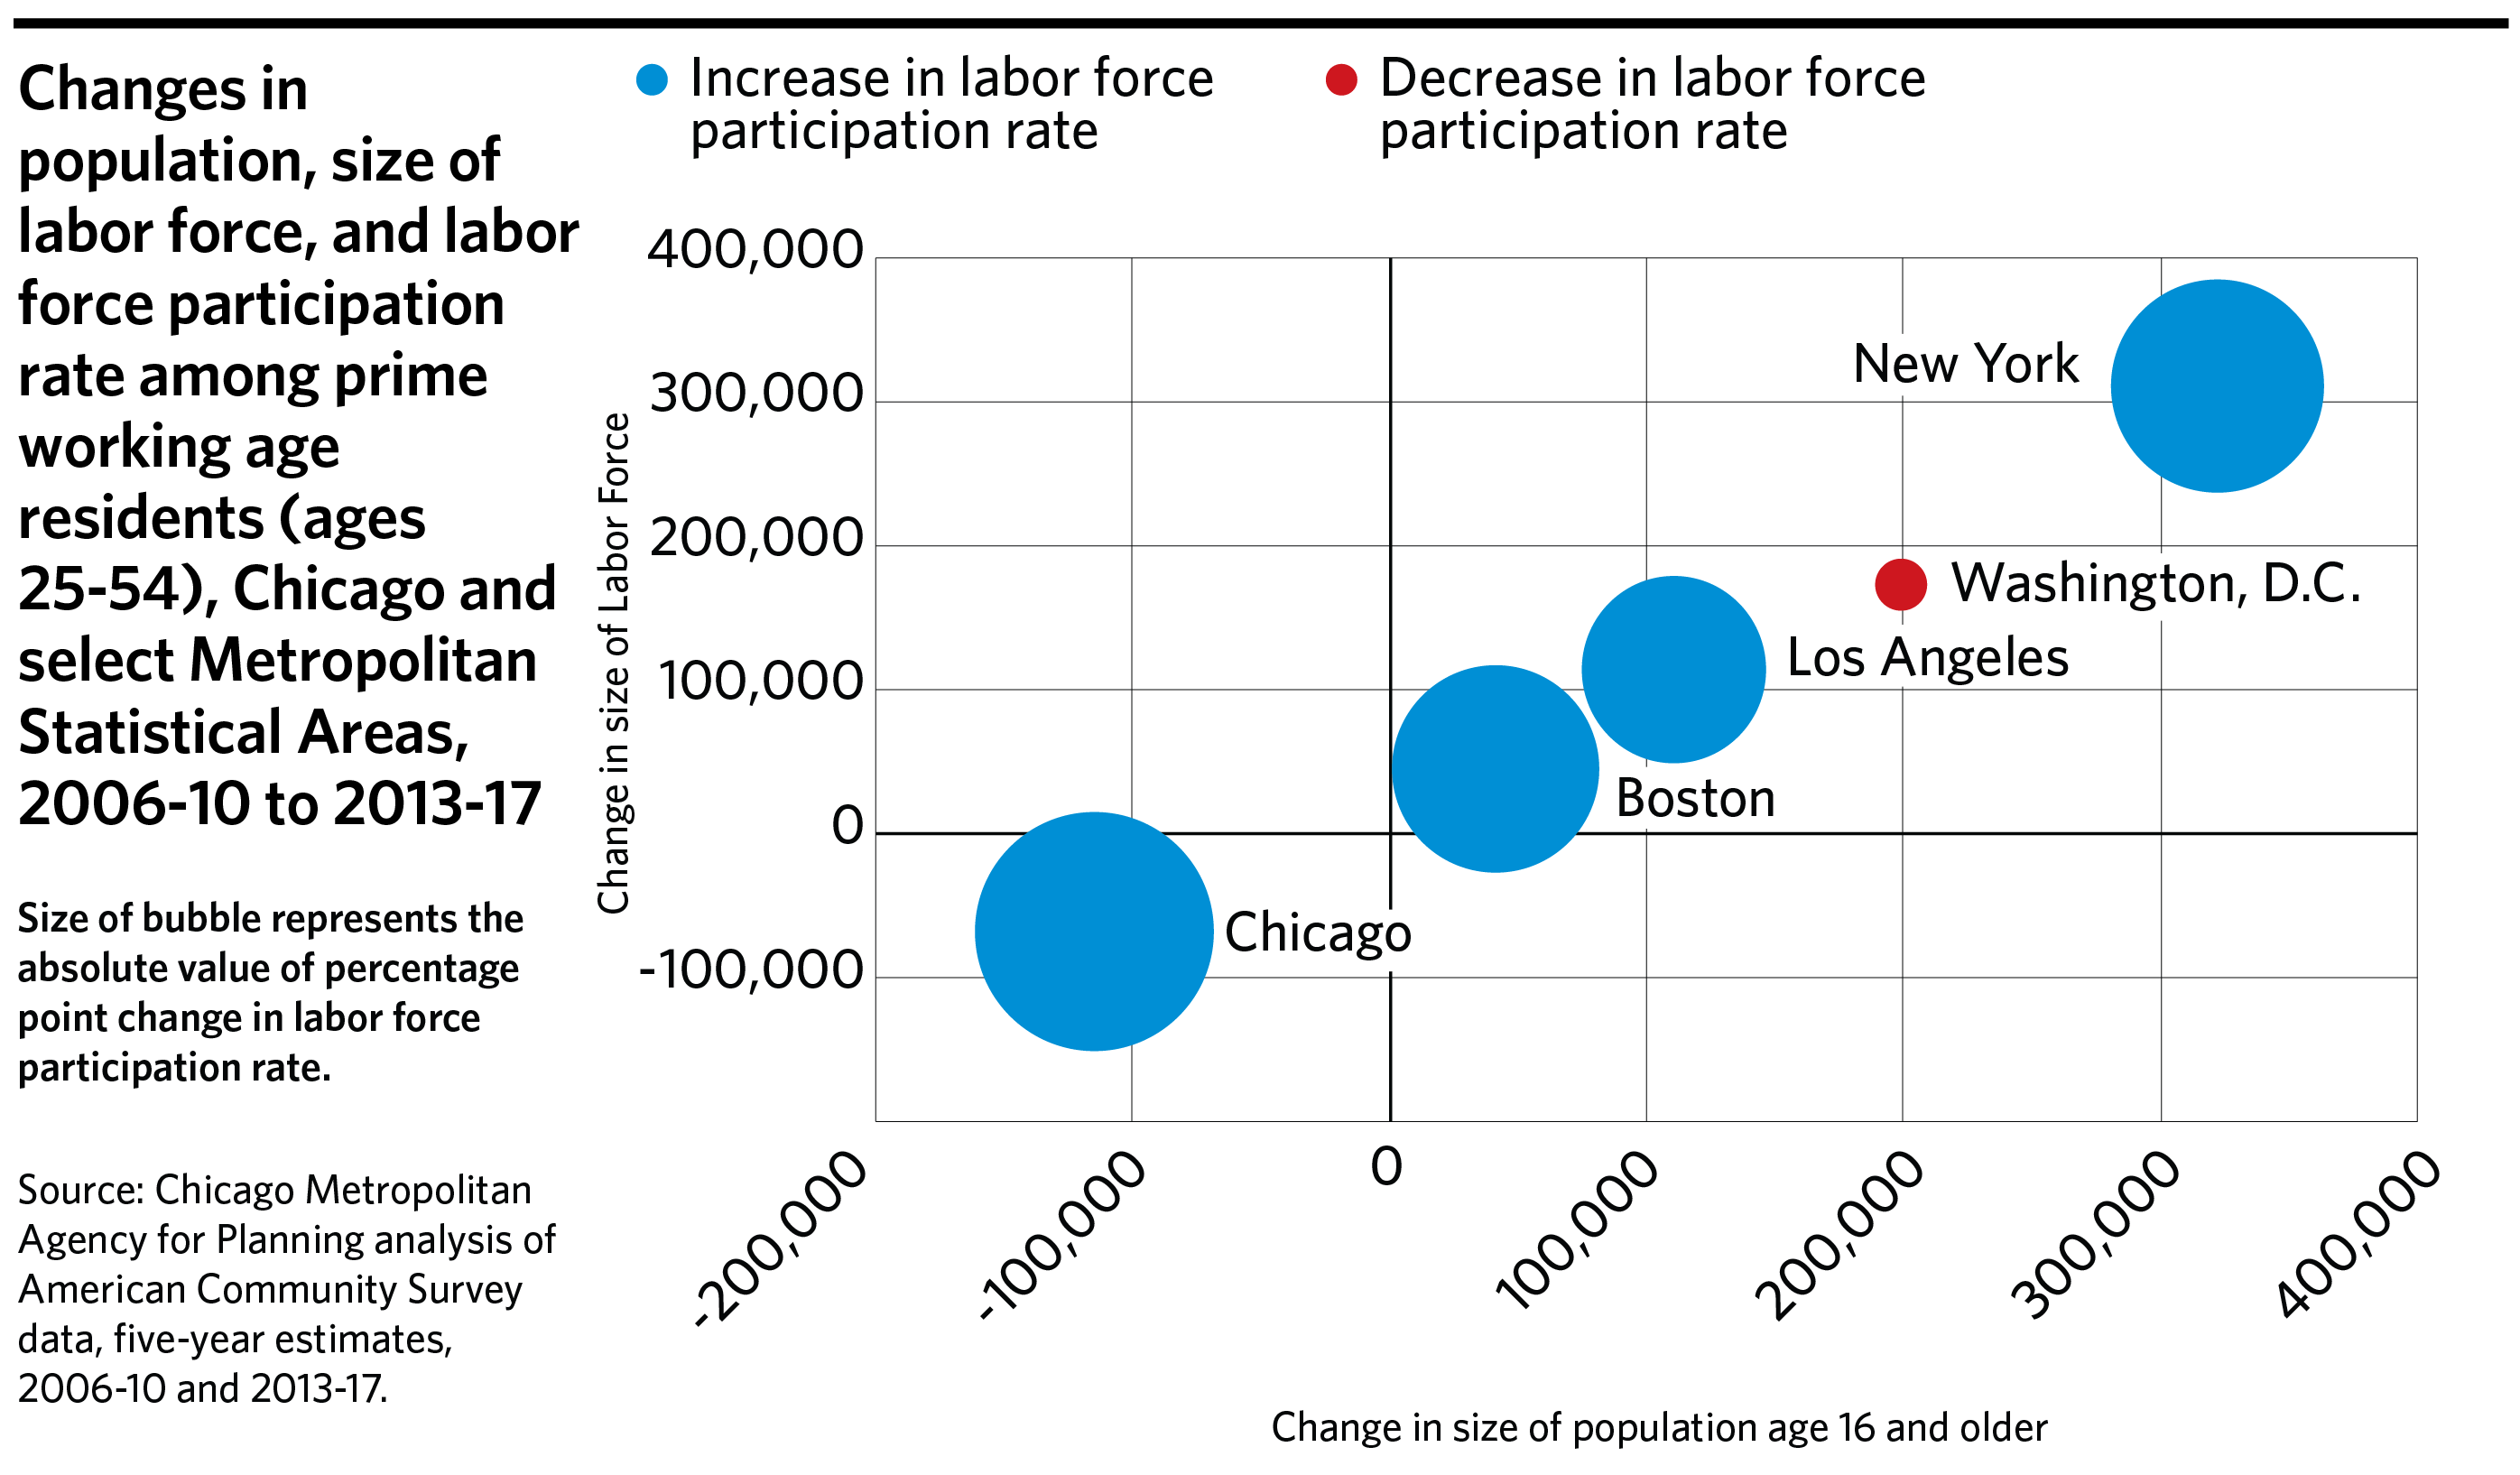 Changes in population, size of labor force, and labor force participation rate among prime working age residents, Chicago and select metro statistical areas, 2006-10 to 2013-17 graphic